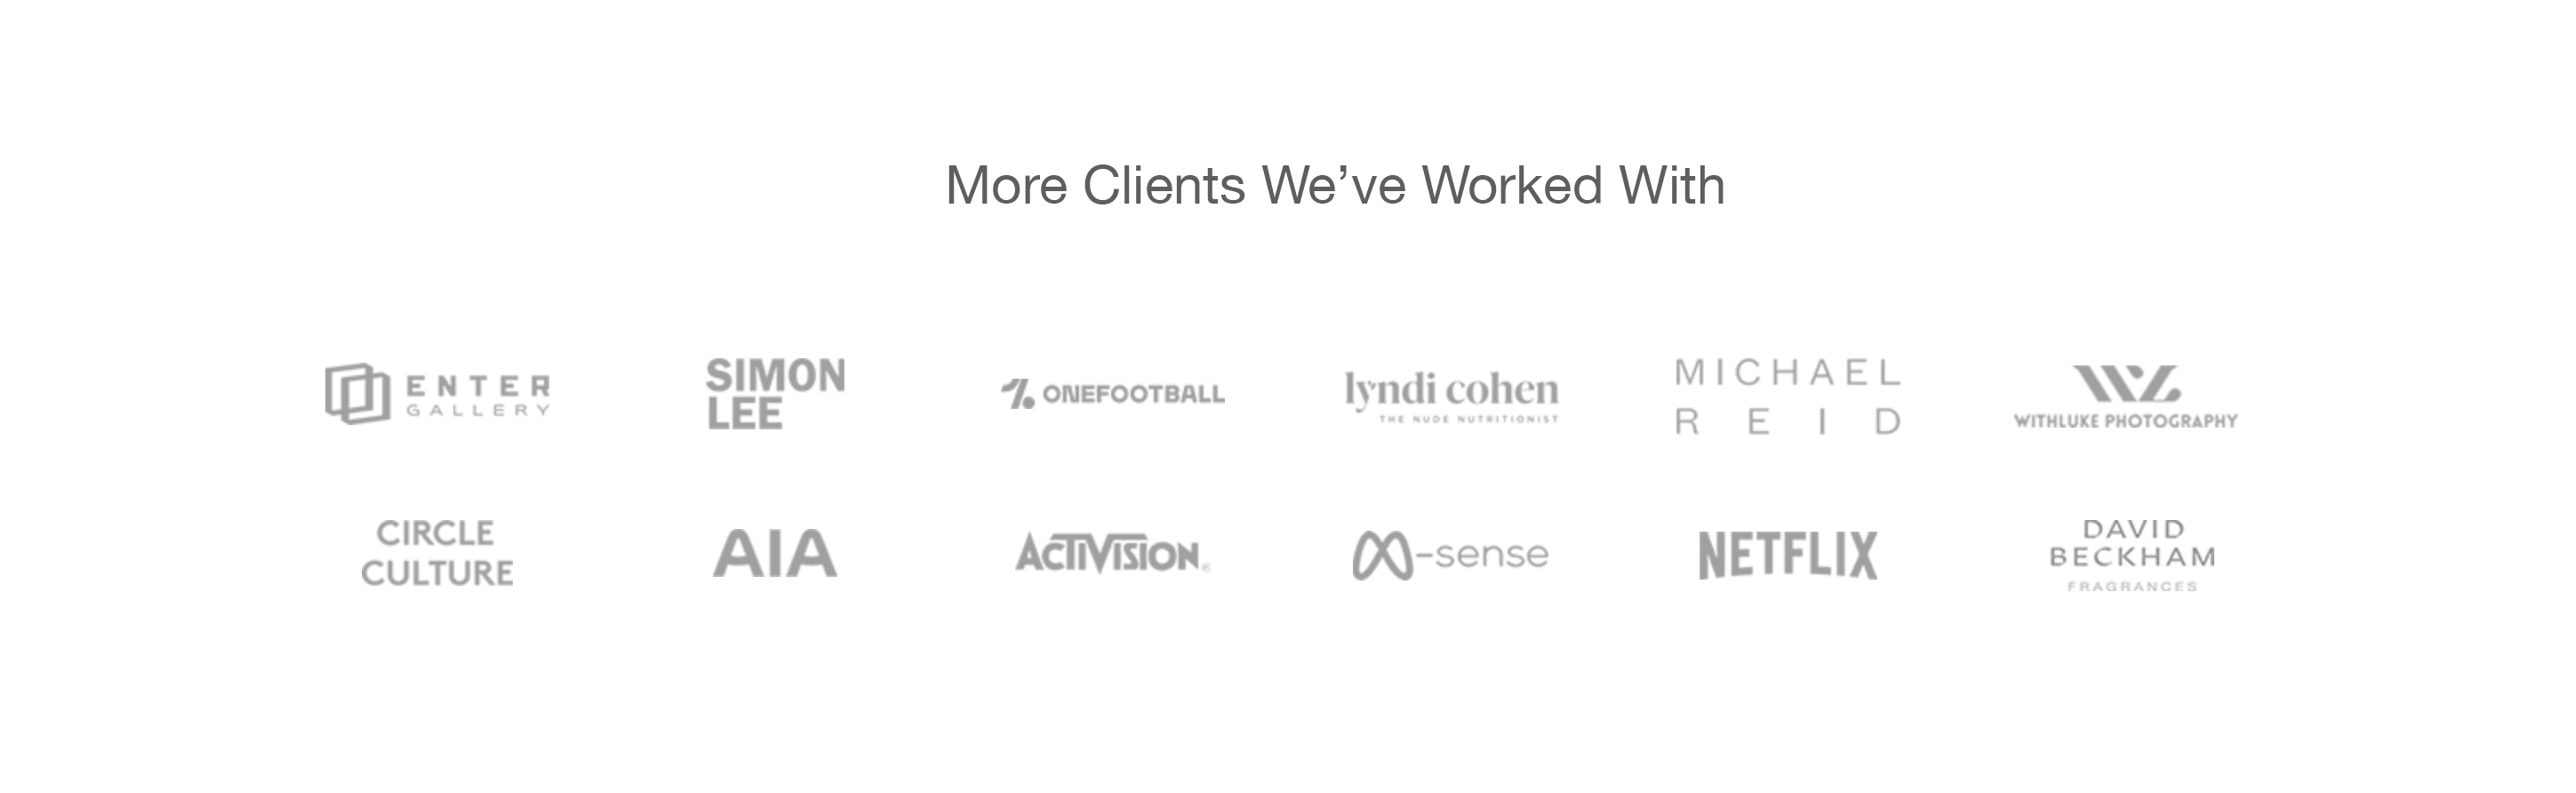 More Clients We've Worked With